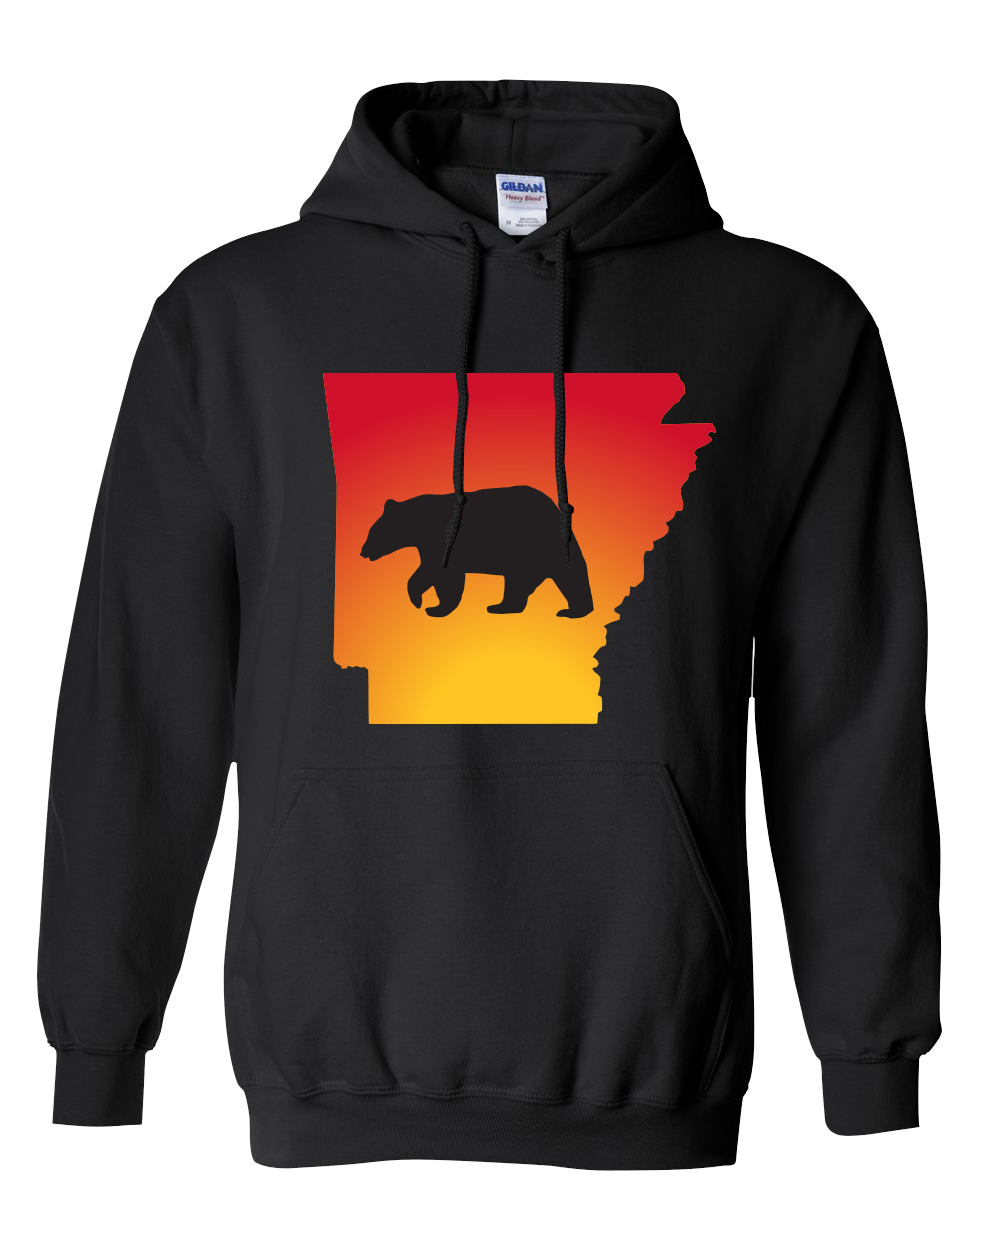 Pullover Hooded Sweatshirt Arkansas Black Black Bear Vibrant Design High Quality Tight Knit Ring Spun Low Maintenance Cotton Printed With The Newest Available Color Transfer Technology